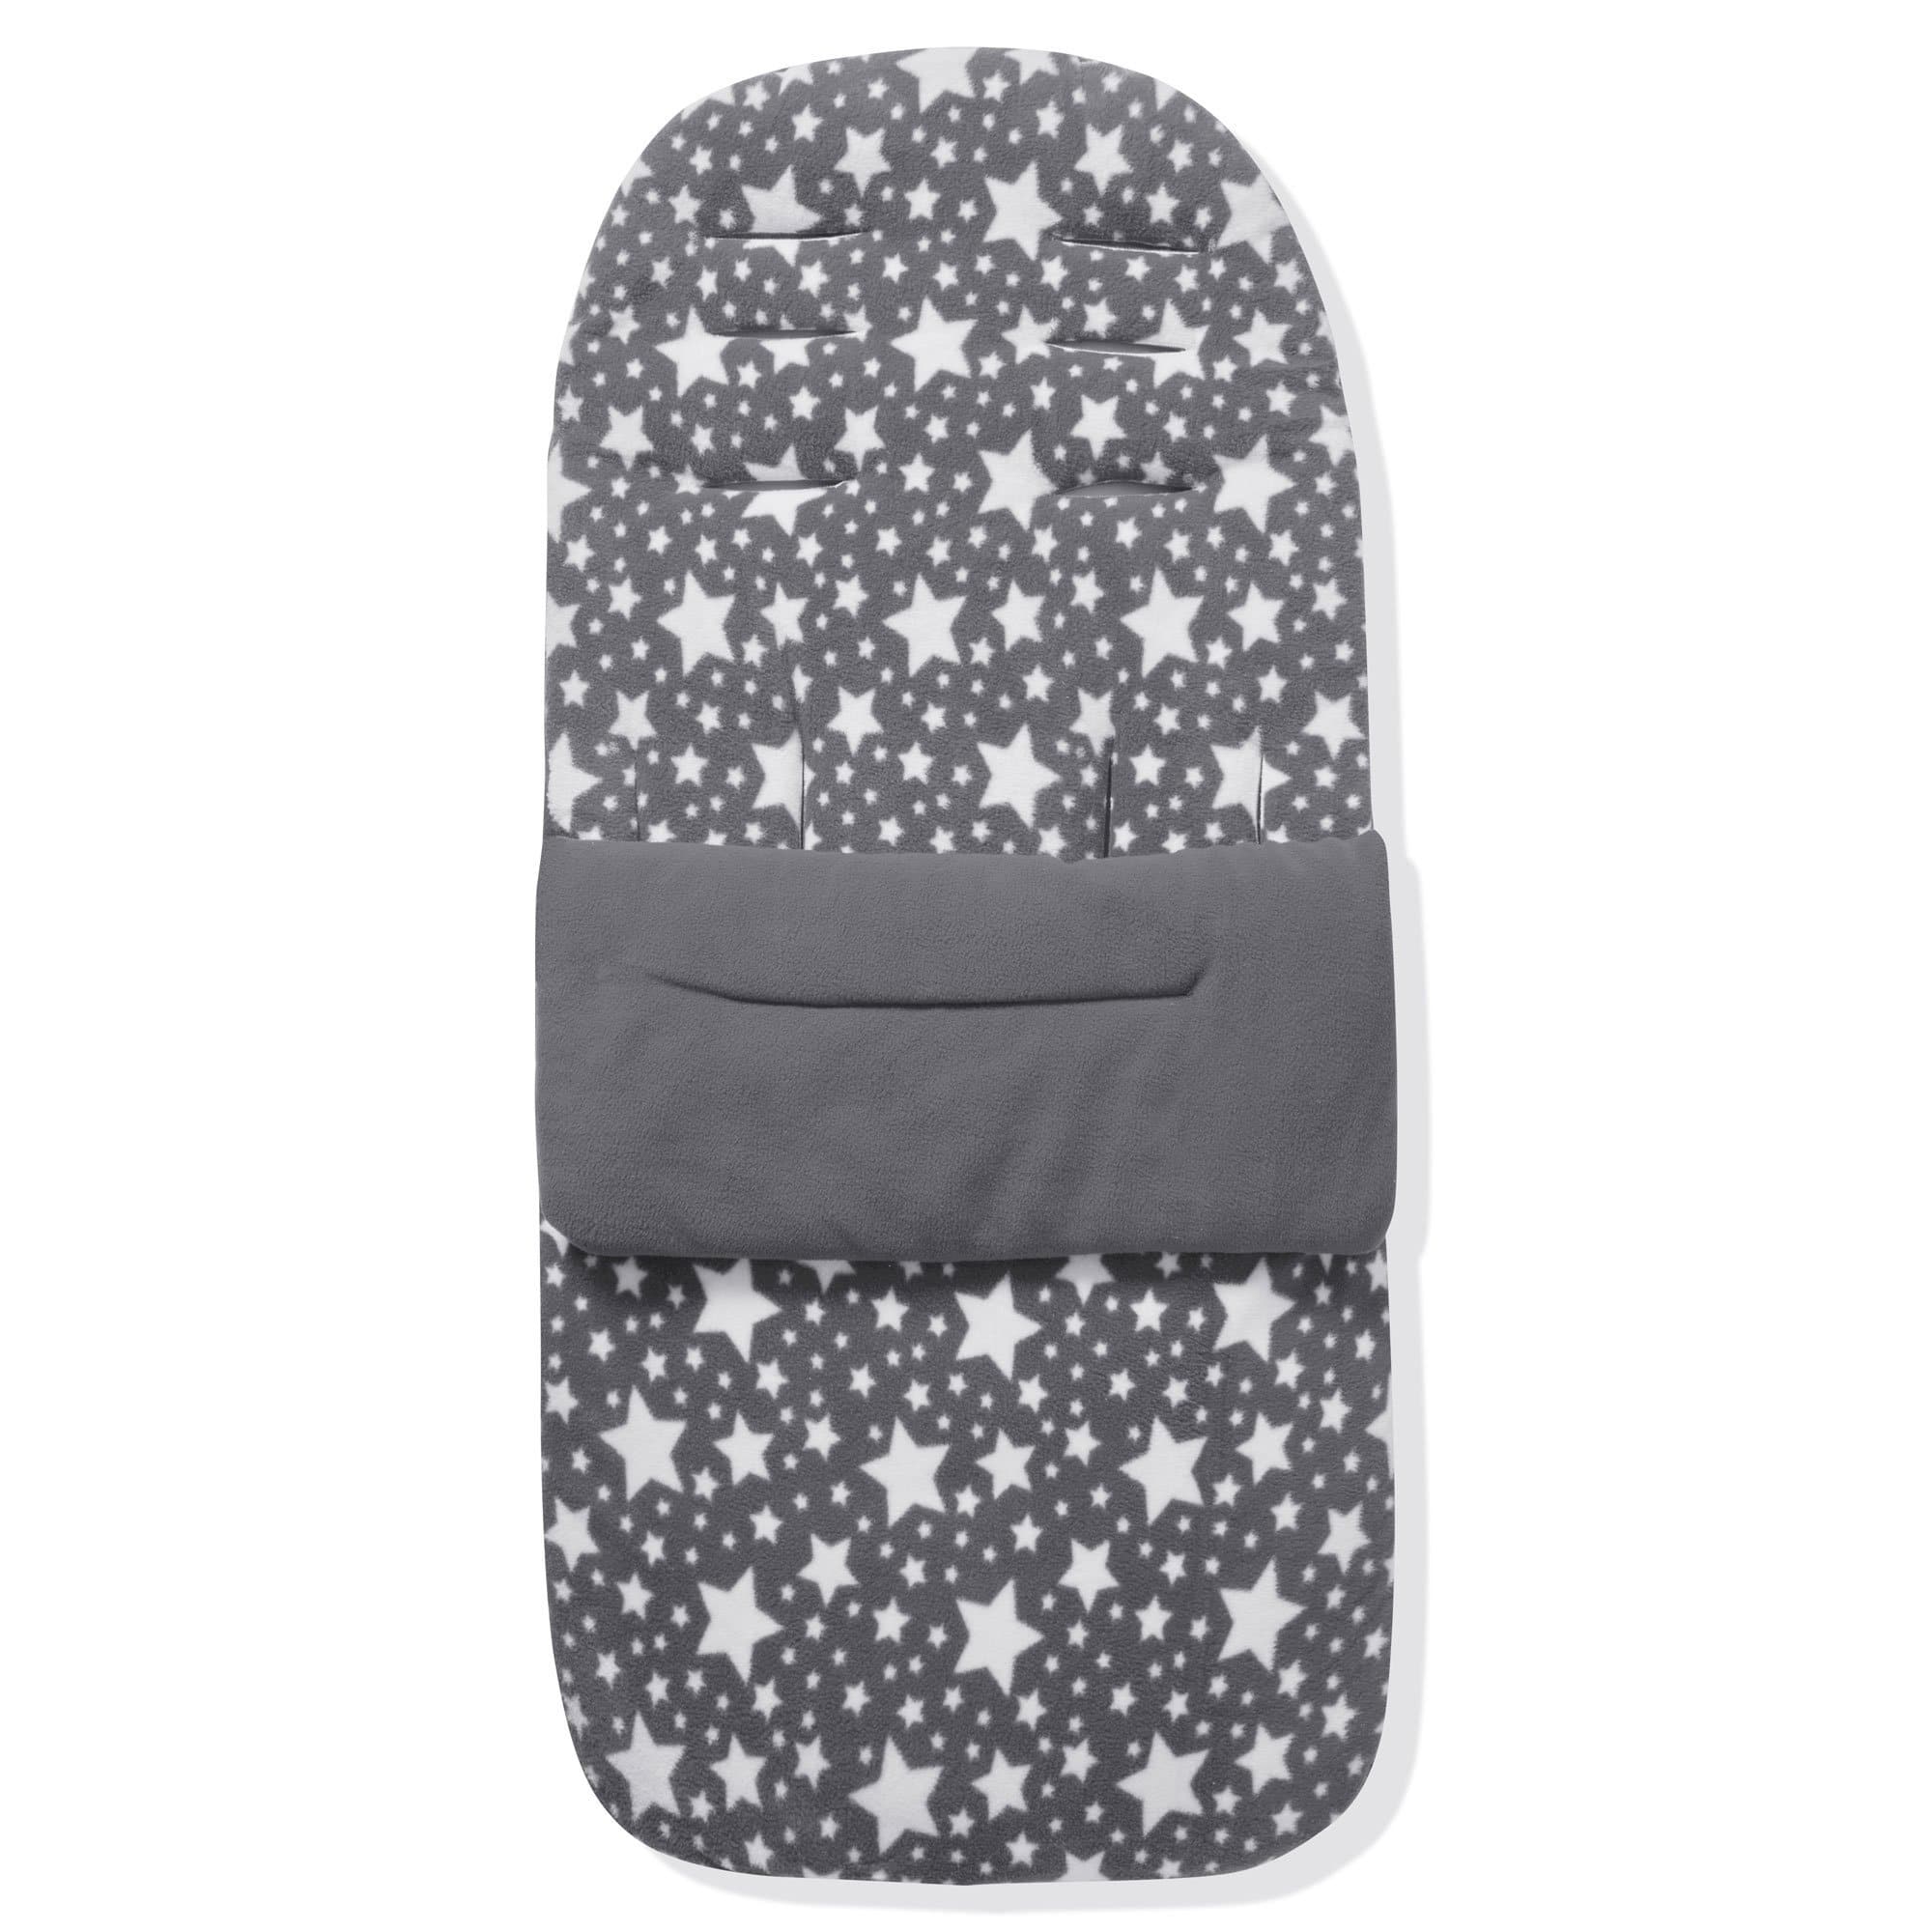 Fleece Footmuff / Cosy Toes Compatible with Hesba - Grey Star / Fits All Models | For Your Little One